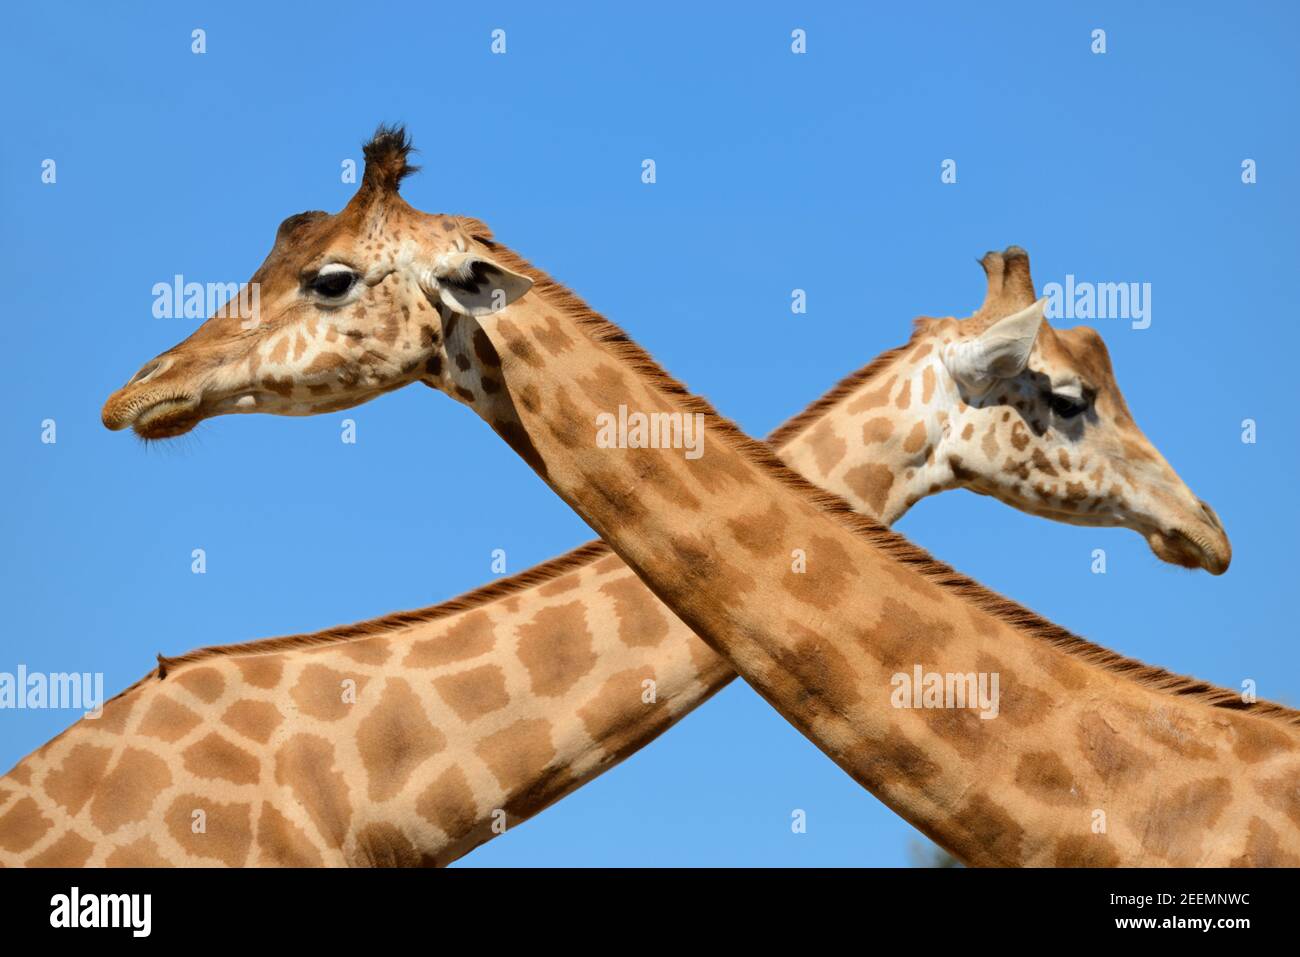 Pair or Couple of Giraffes, Giraffa camelopardalis, with Crossed Necks in X-Shape Stock Photo